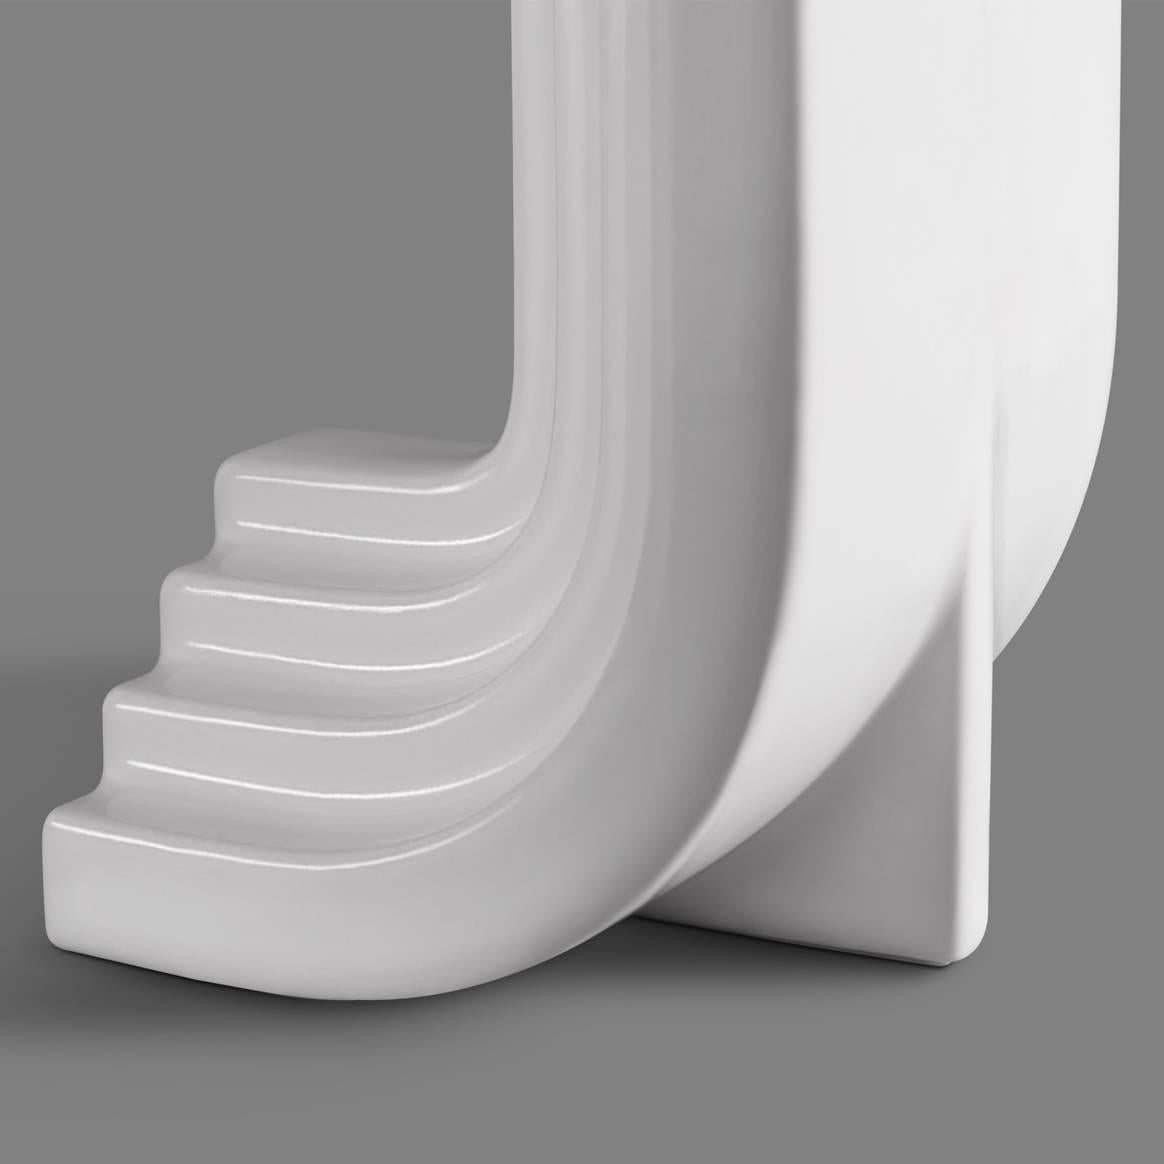 Carlo Bookend in Contemporary 3D Printed Gloss Gloss White Porcelain In Excellent Condition For Sale In New York, NY